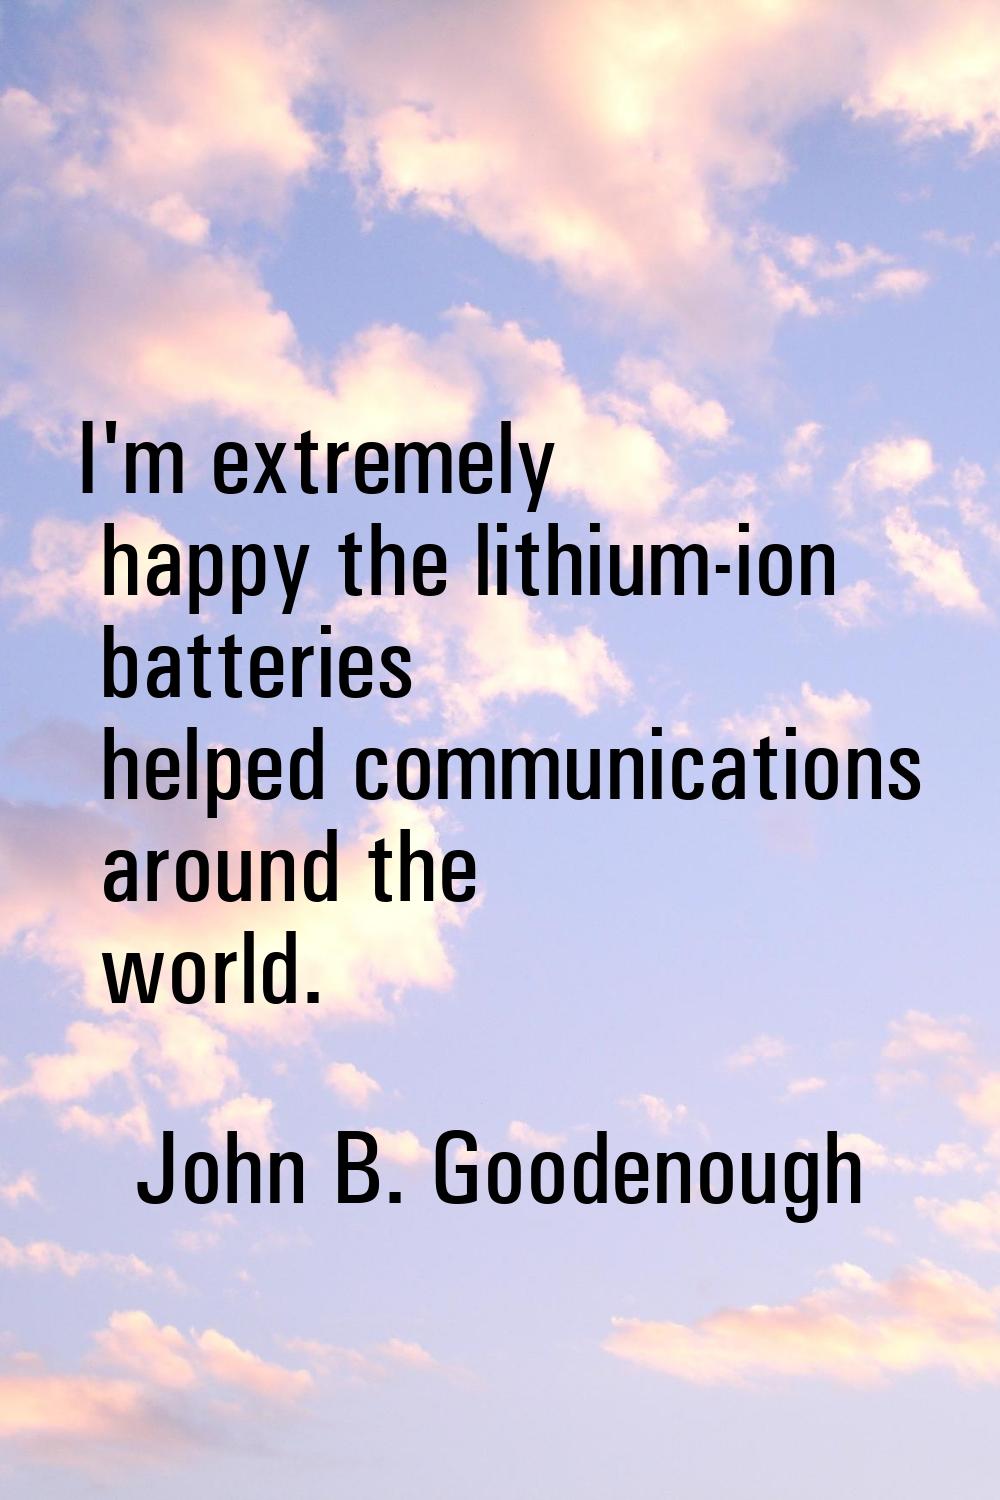 I'm extremely happy the lithium-ion batteries helped communications around the world.